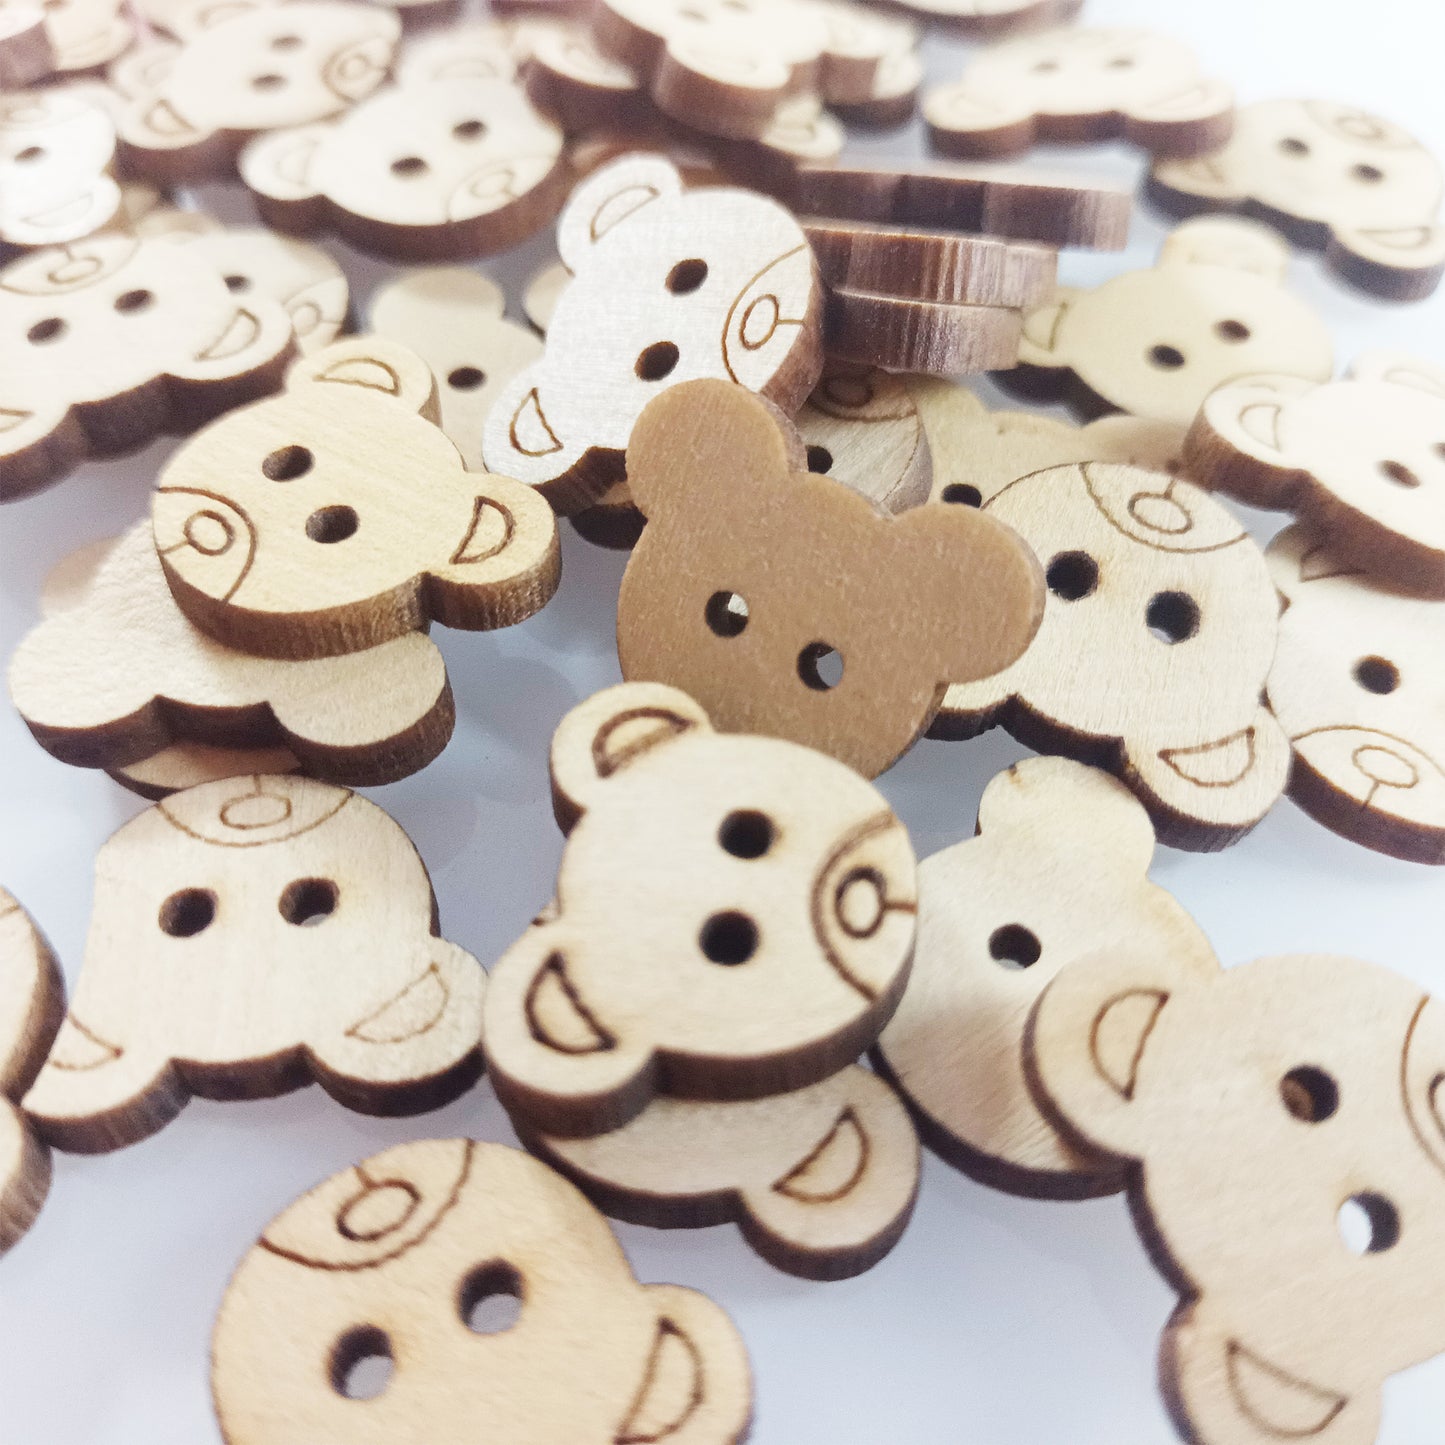 50pcs 19mm Teddy Bear Clothing Wooden Buttons 2 Hole Flatback Sewing Brown